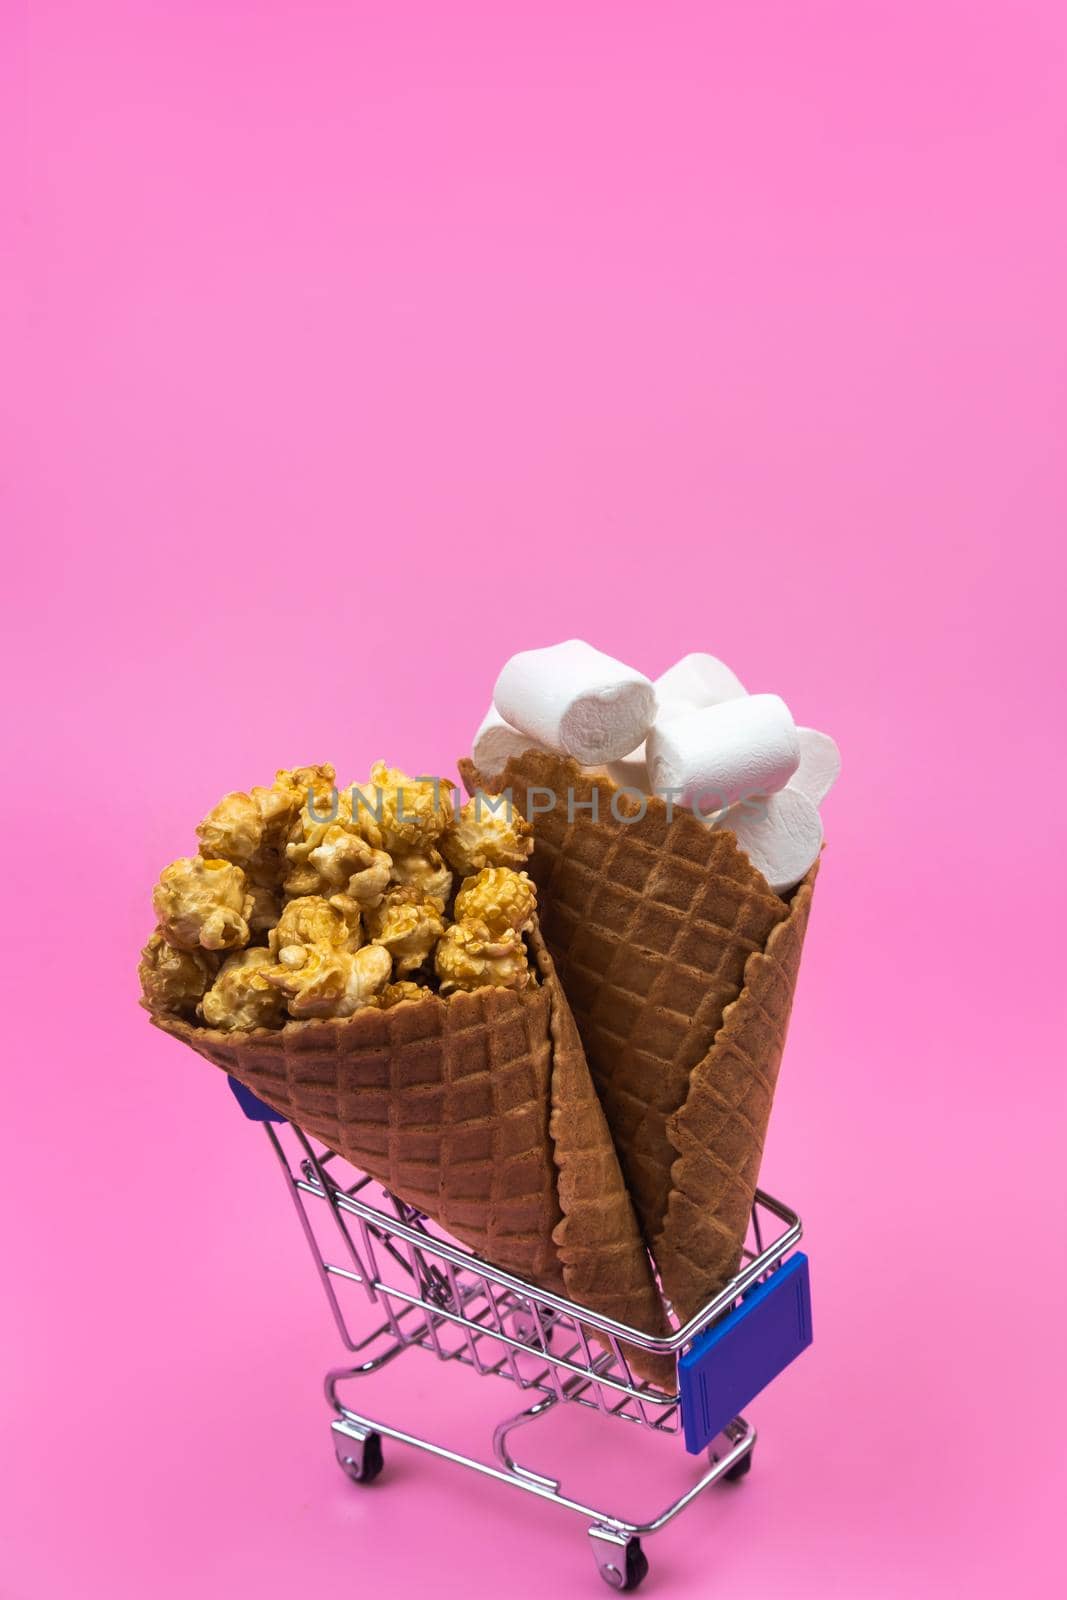 Shopping cart with ice cream cones with sweets on a pink background.